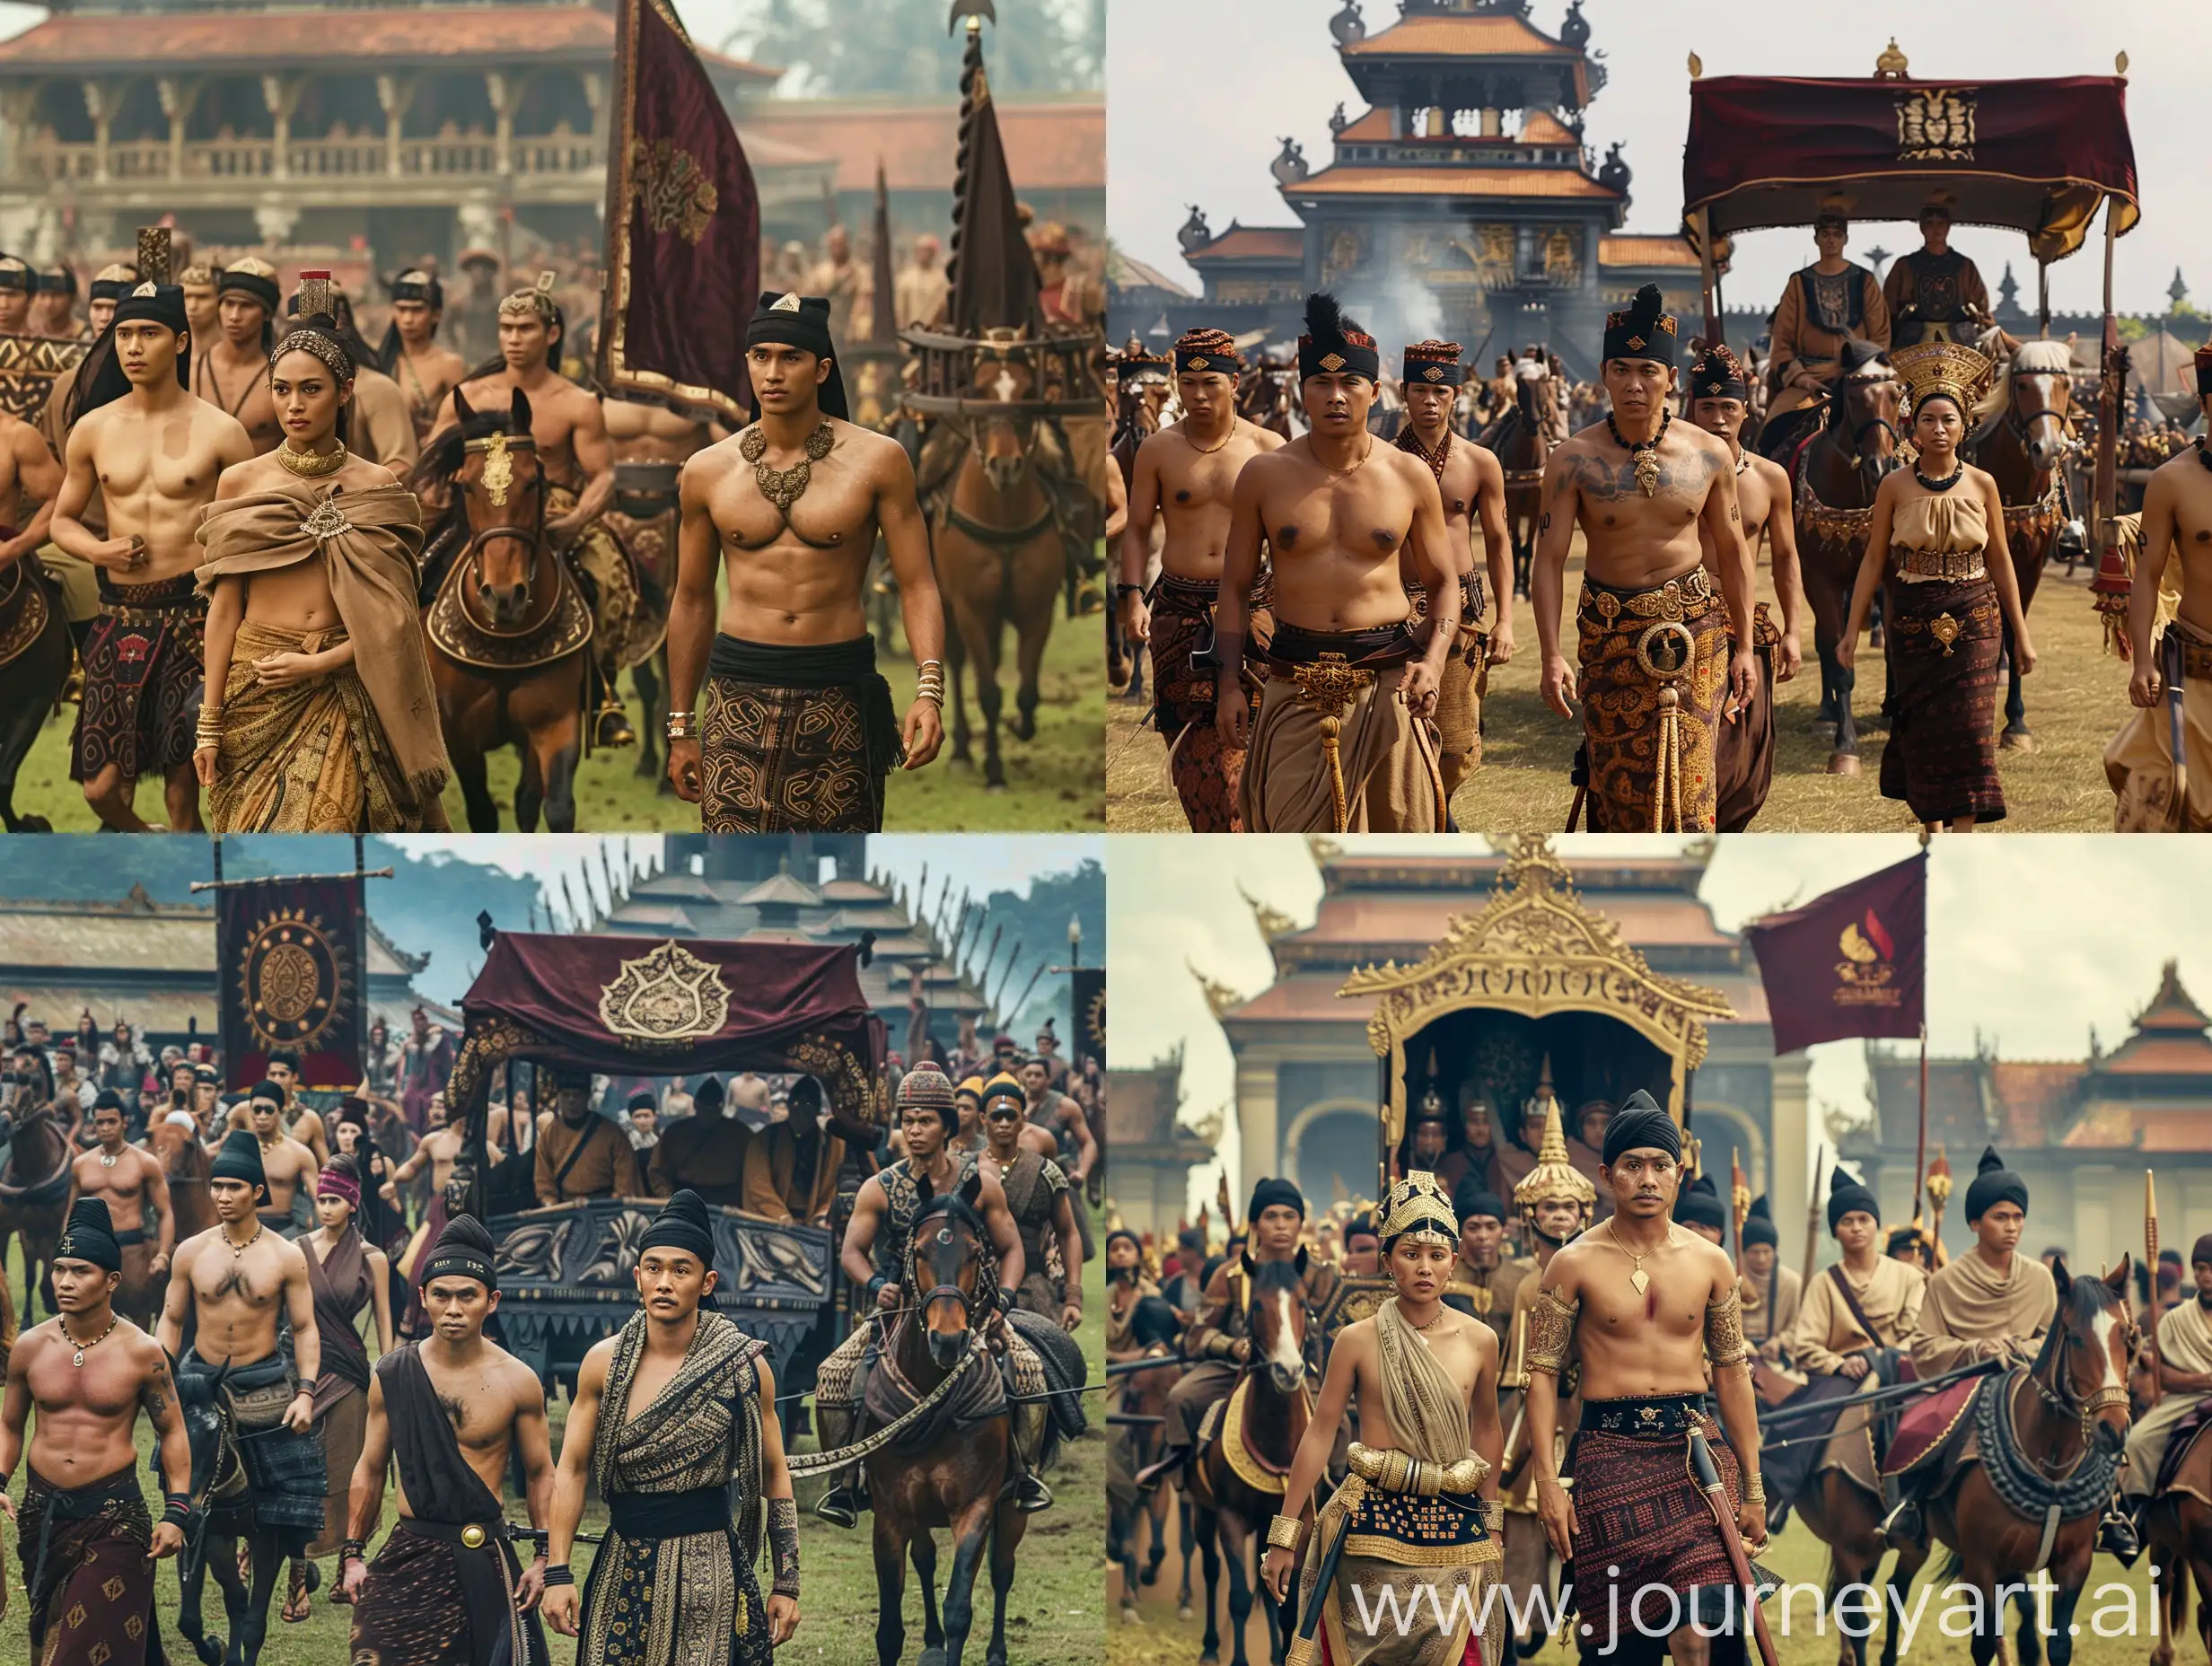 movie scene, the royal group is dressed in traditional Indonesian clothes without shirts, Indonesian faces, brown skin, hair tied in a bun, wearing Sundanese black headbands, wearing typical 14th century batik skirts, some are wearing prisai, some are riding horses, they are carrying a palanquin , in the palanquin there is a woman, dressed in a cloth dress, and a gold ornament on her head, they also carry a dark red flag, on the flag the keris logo, they arrive at the royal field, the background of the royal building